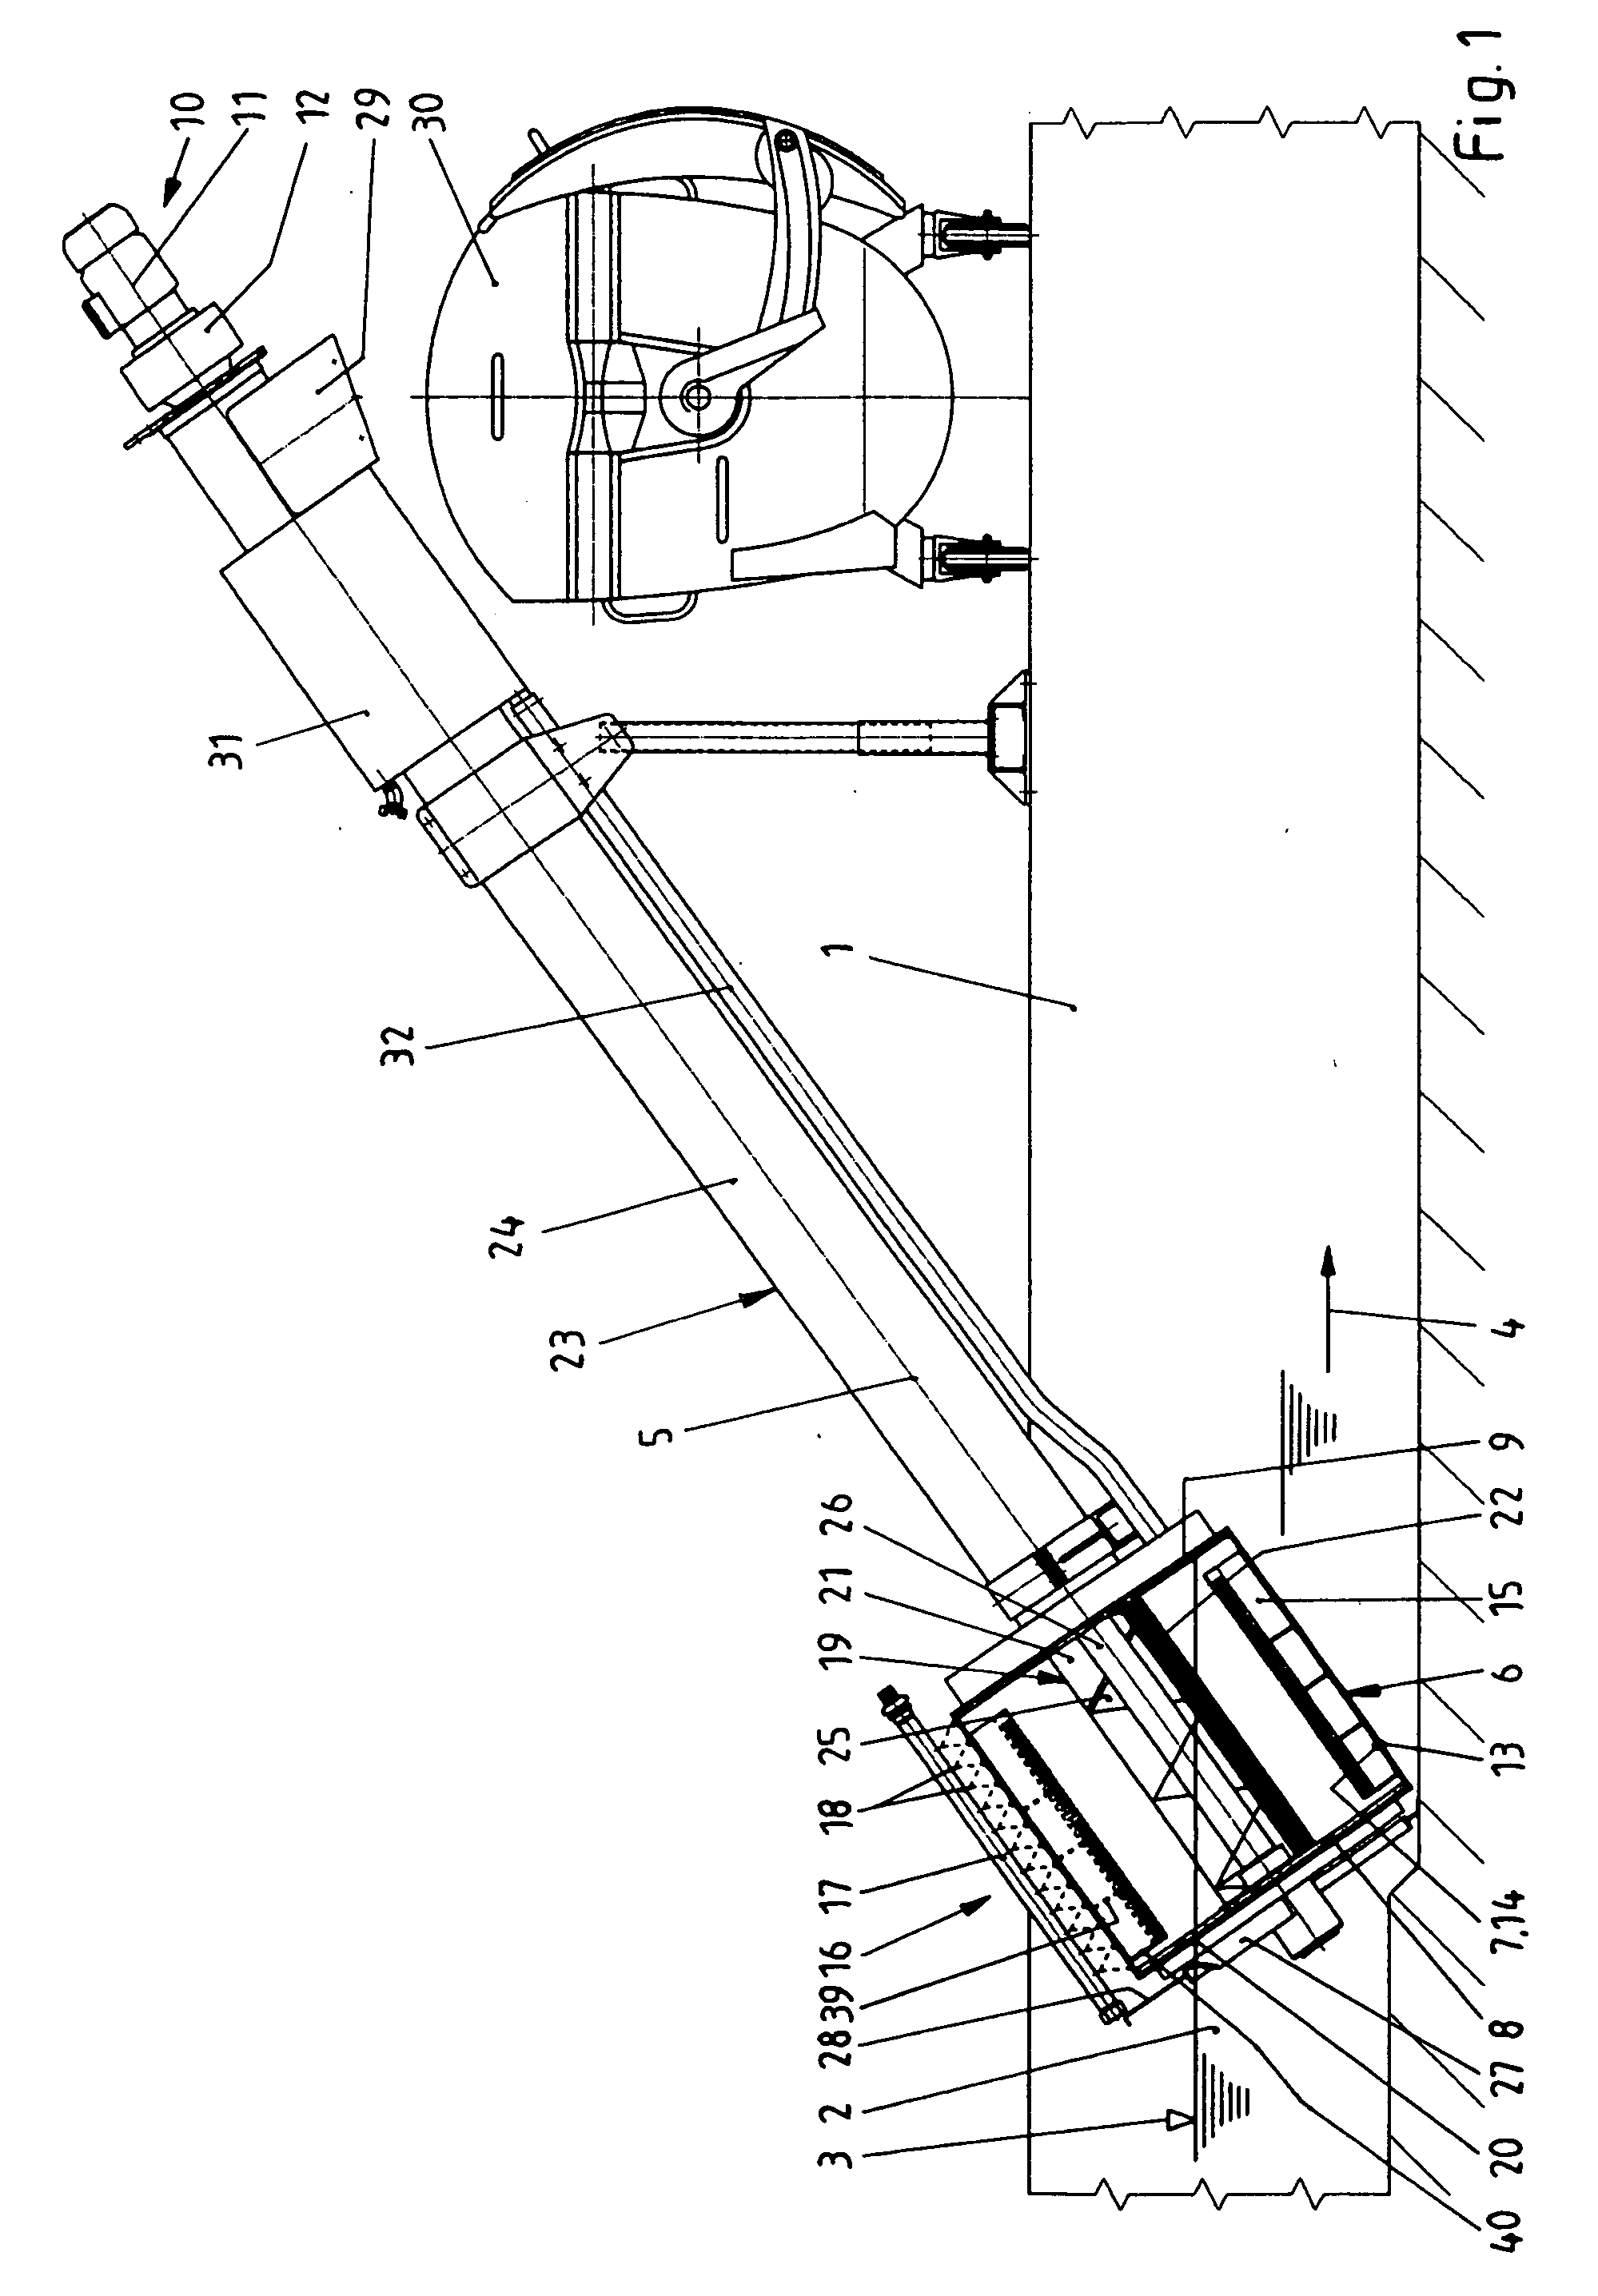 Apparatus for removing material from a liquid flowing through a channel